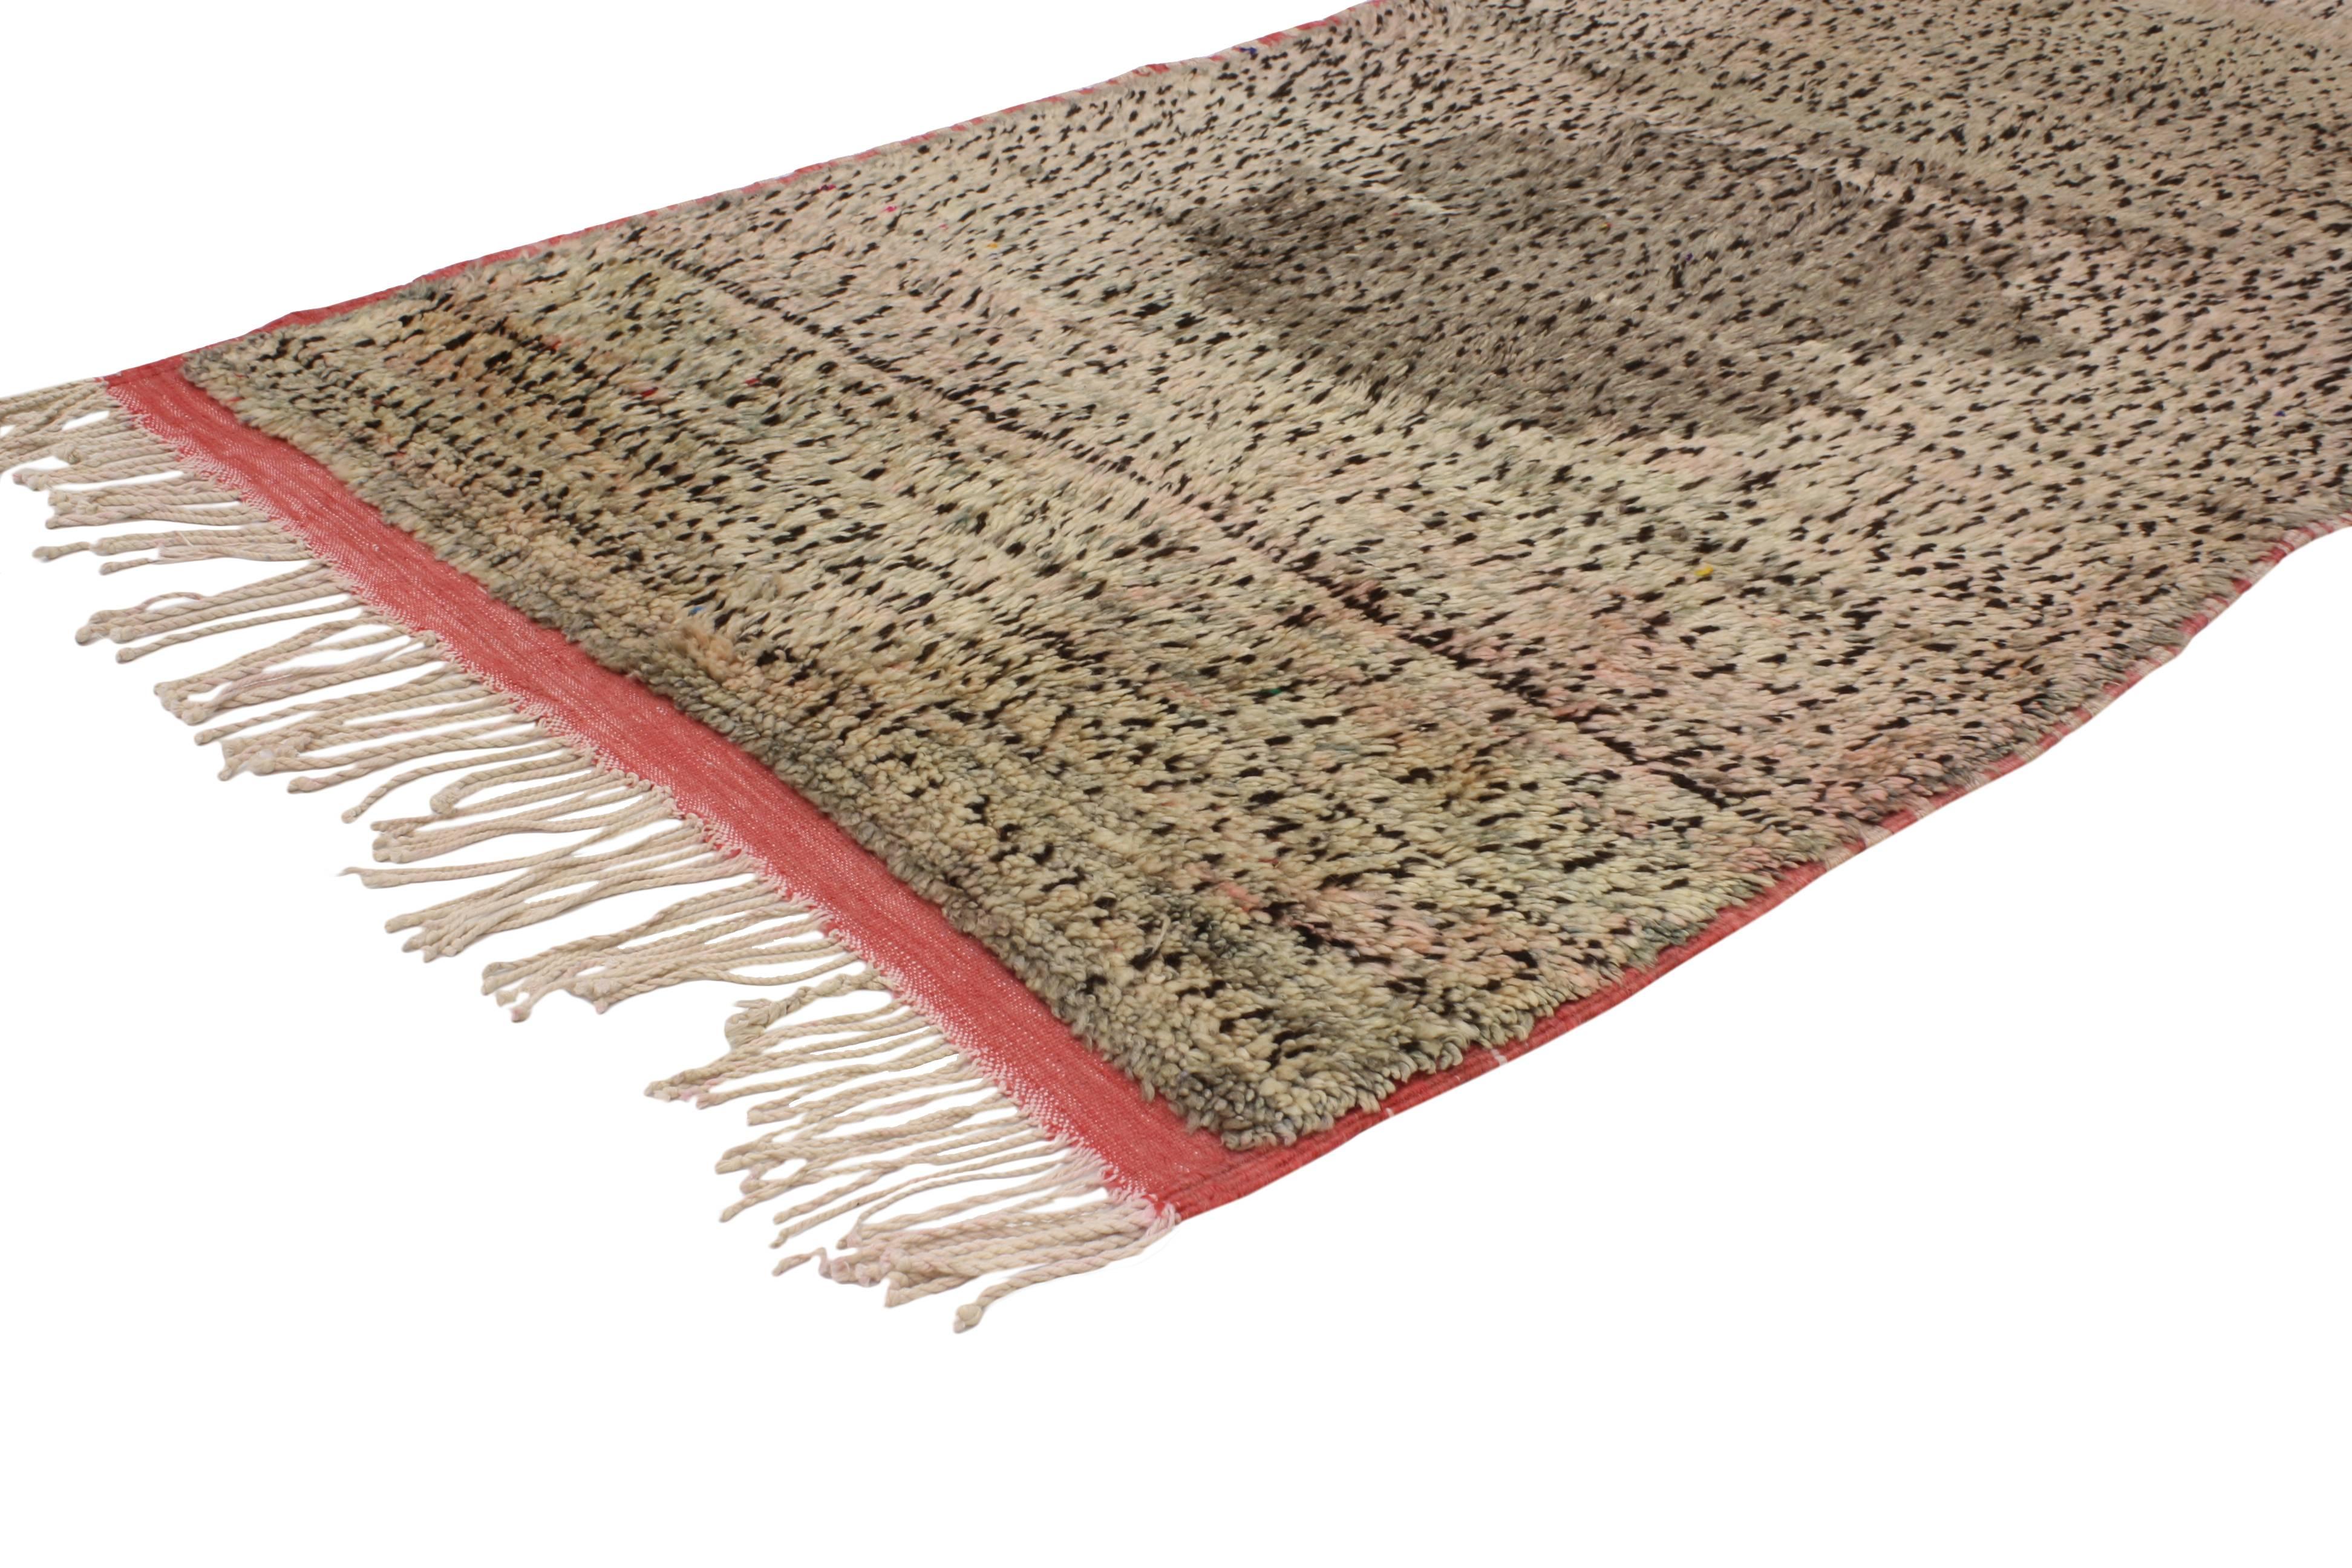 20406 Vintage Moroccan Rug with Modern Bauhaus Style, Berber Moroccan Rug. At first glance this hand-knotted wool vintage Moroccan rug seems to be asymmetrical but upon closer look it reveals balance through the differently placed motifs. The warm,